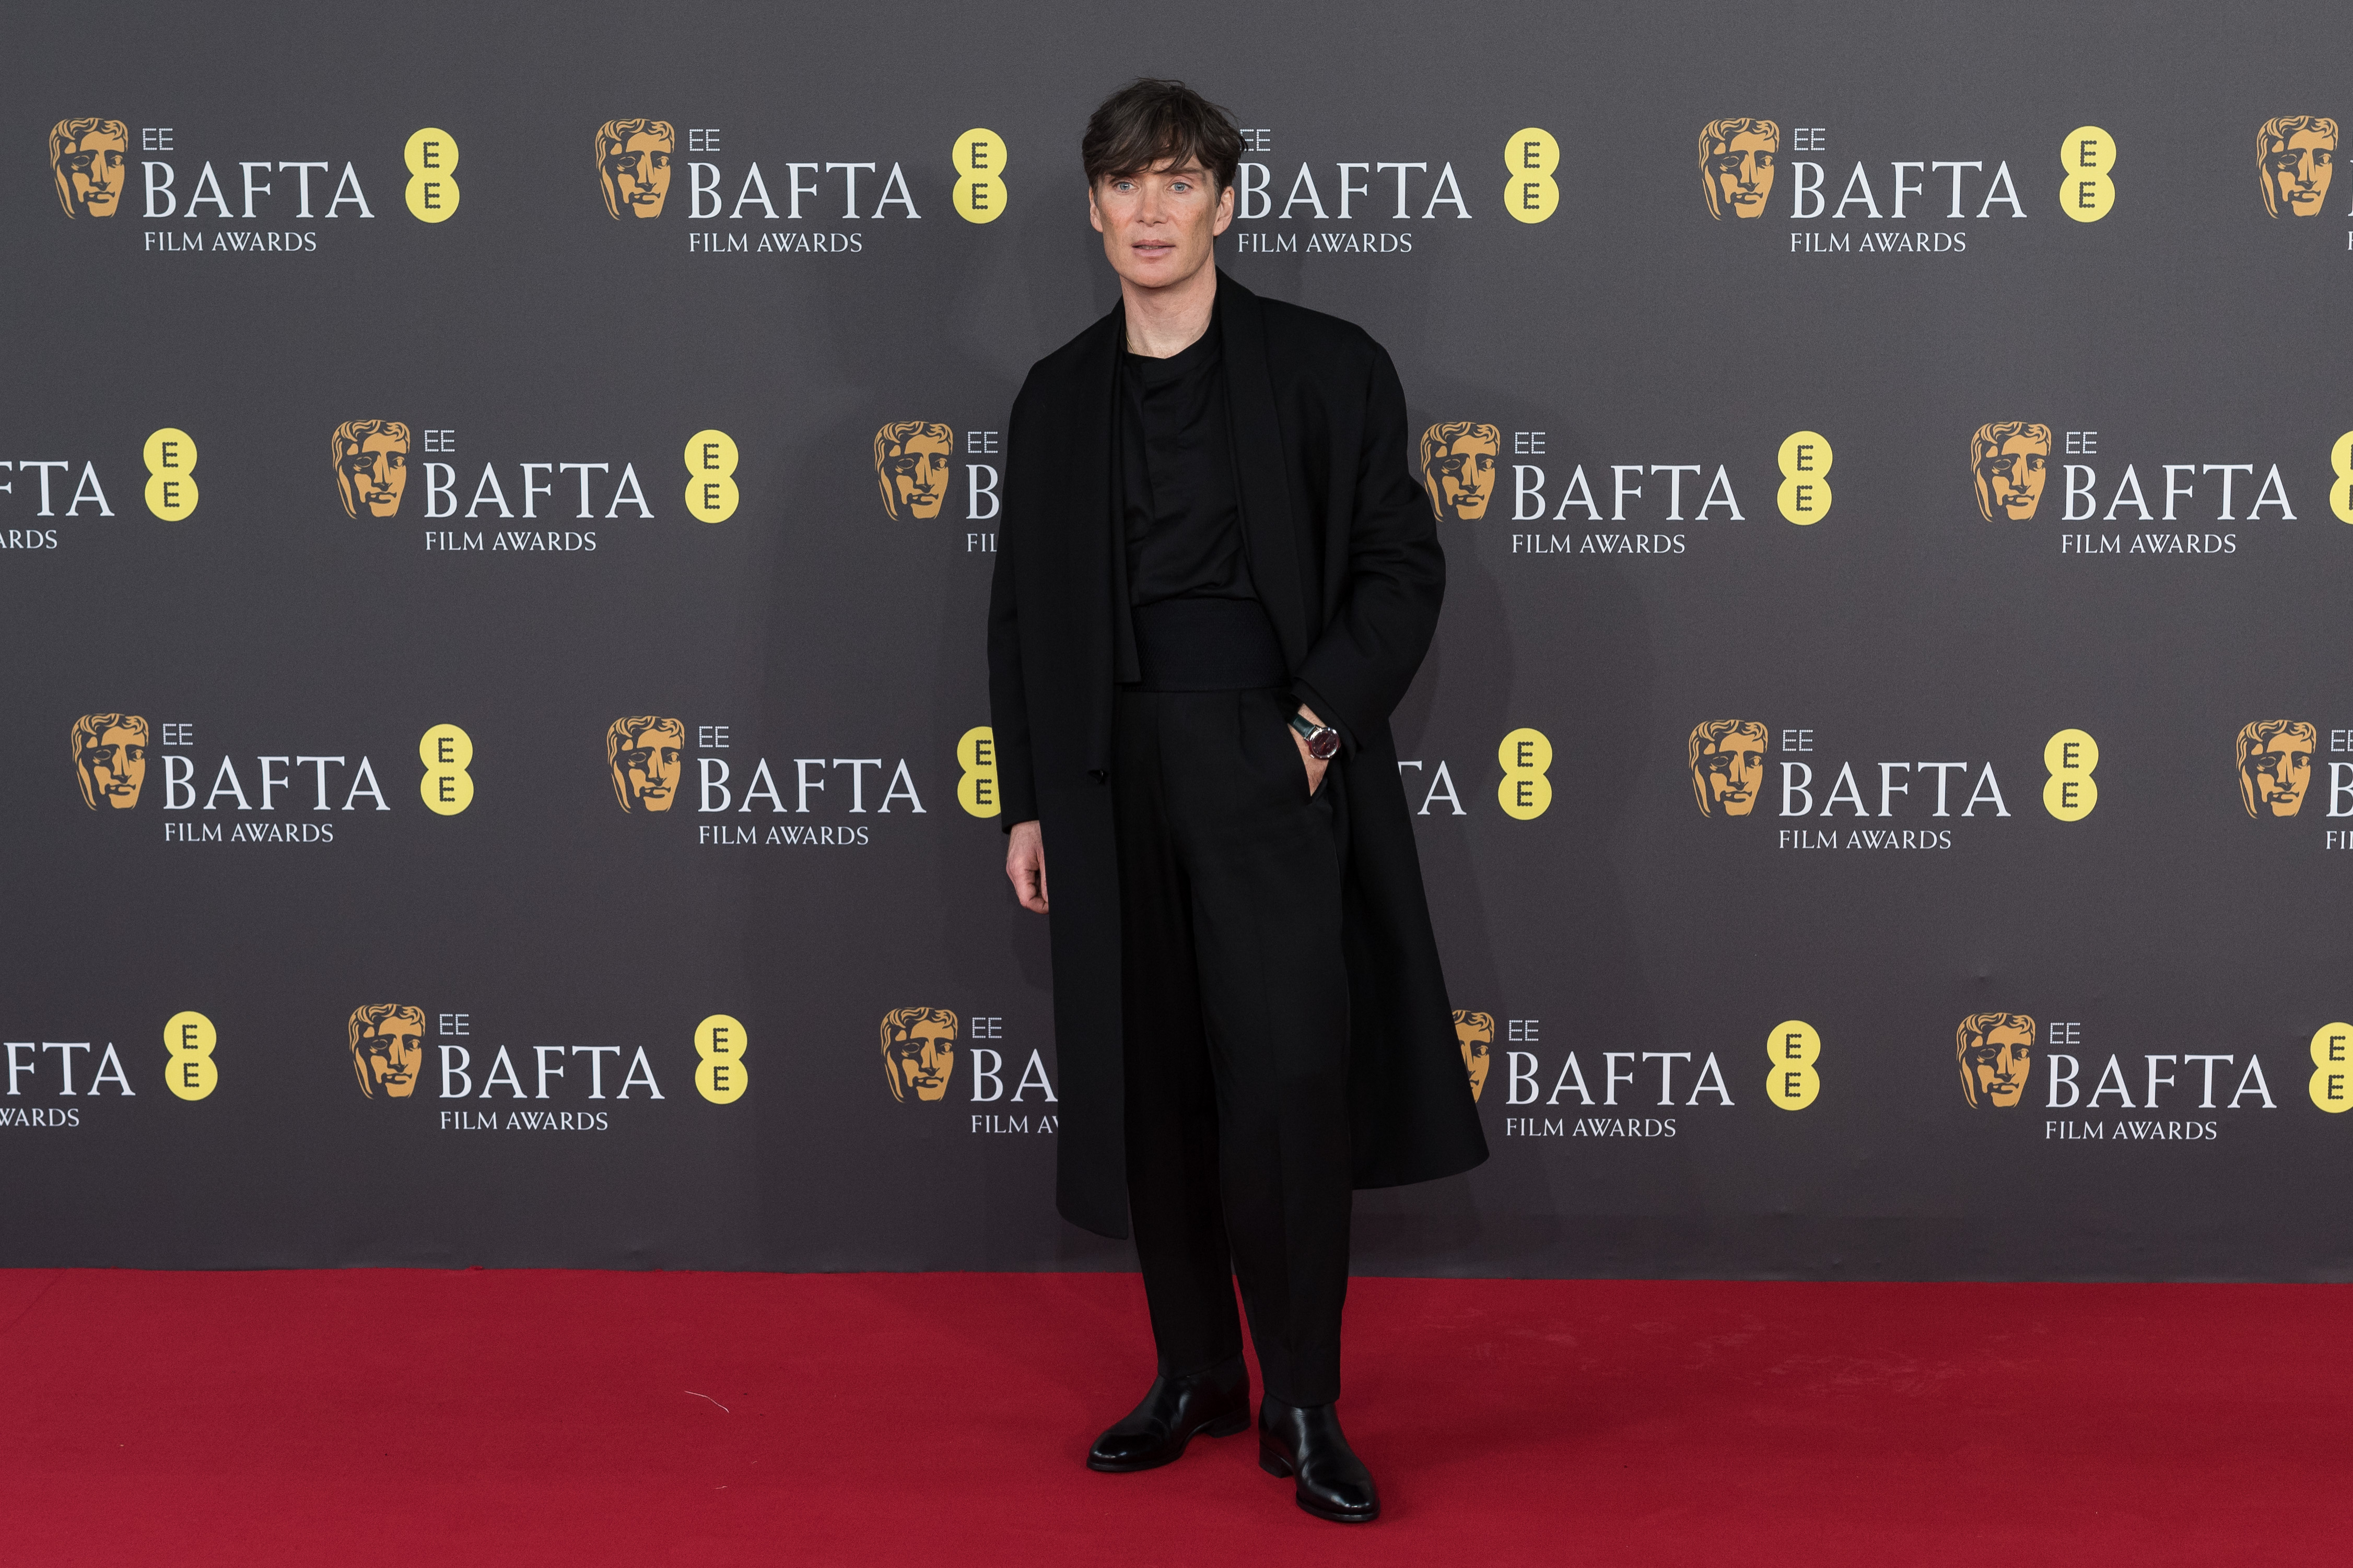 Actor Cillian Murphy on the red carpet wearing a black suit and coat